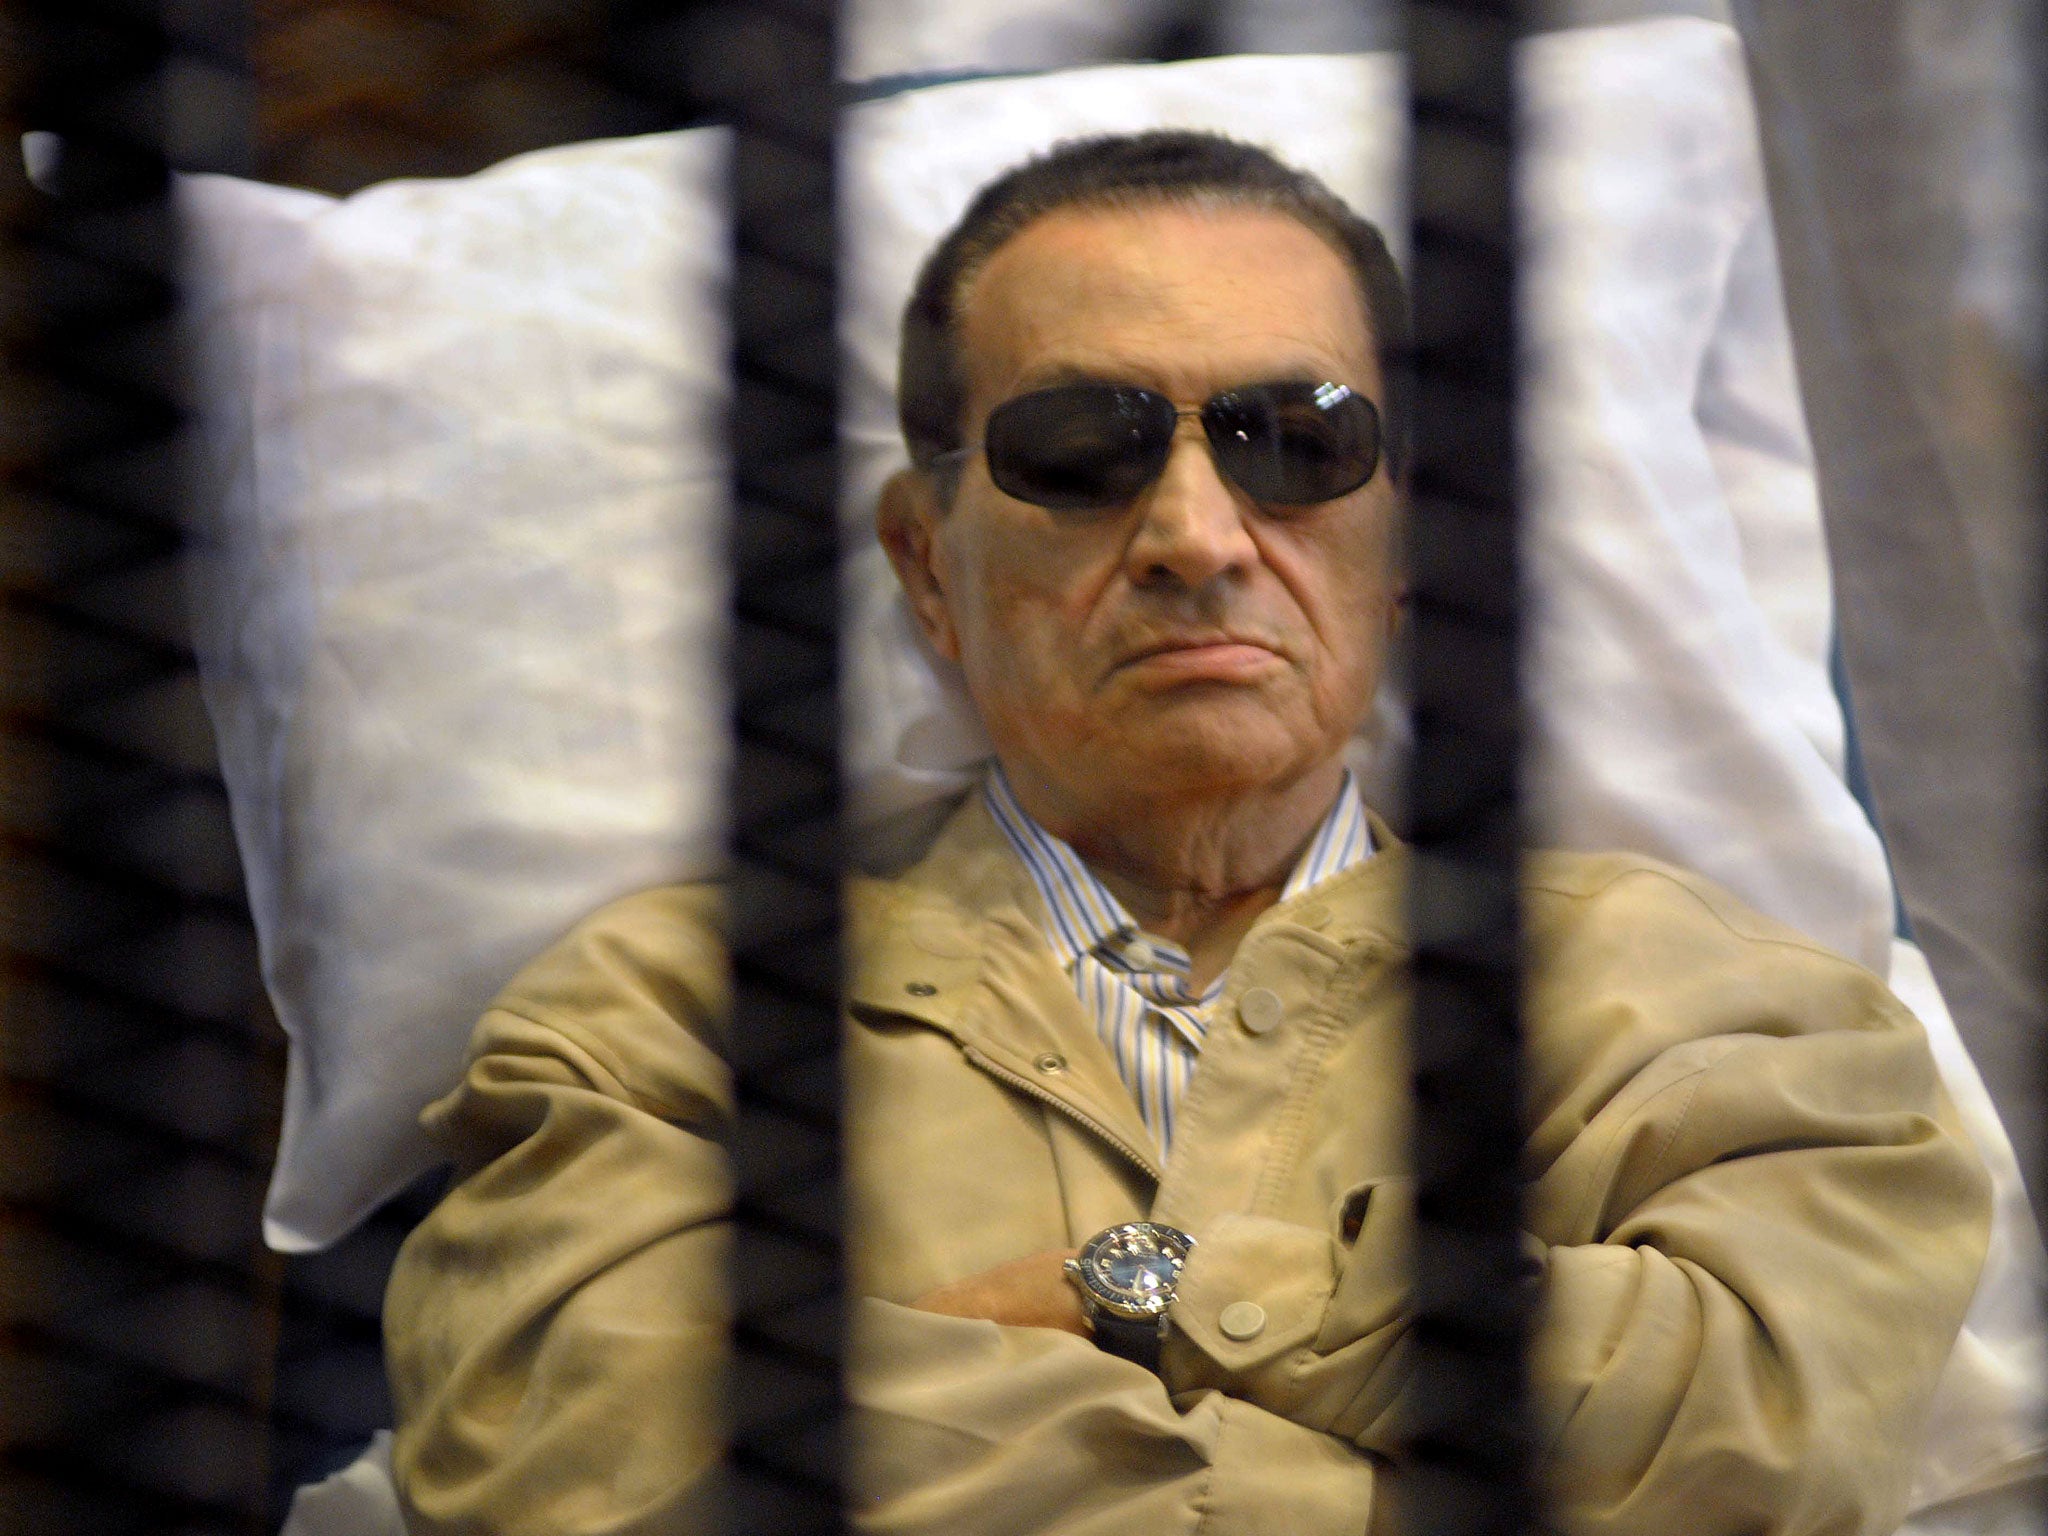 Ousted Egyptian president Hosni Mubarak sits inside a cage in a courtroom during his verdict hearing in Cairo on June 2, 2012. A judge sentenced Mubarak to life in prison after convicting him of involvement in the murder of protesters during the uprising that ousted him last year.